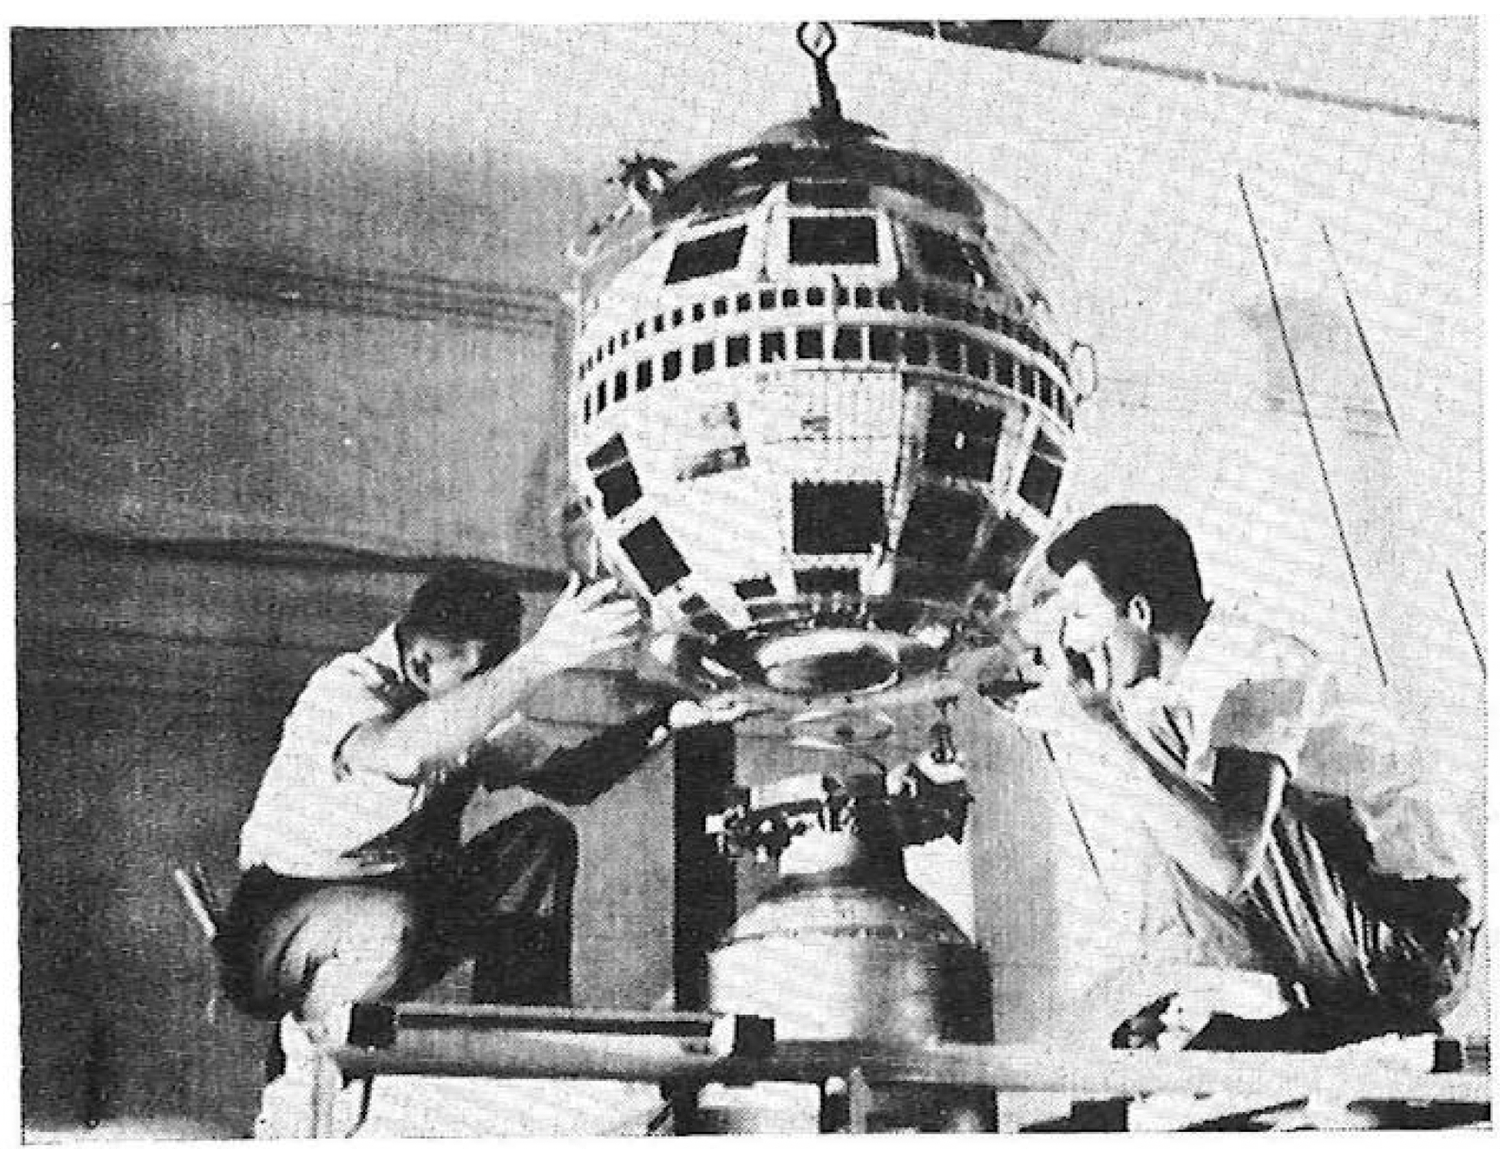 The TELSTAR satellite being mounted on the Thor-Delta launch vehicle